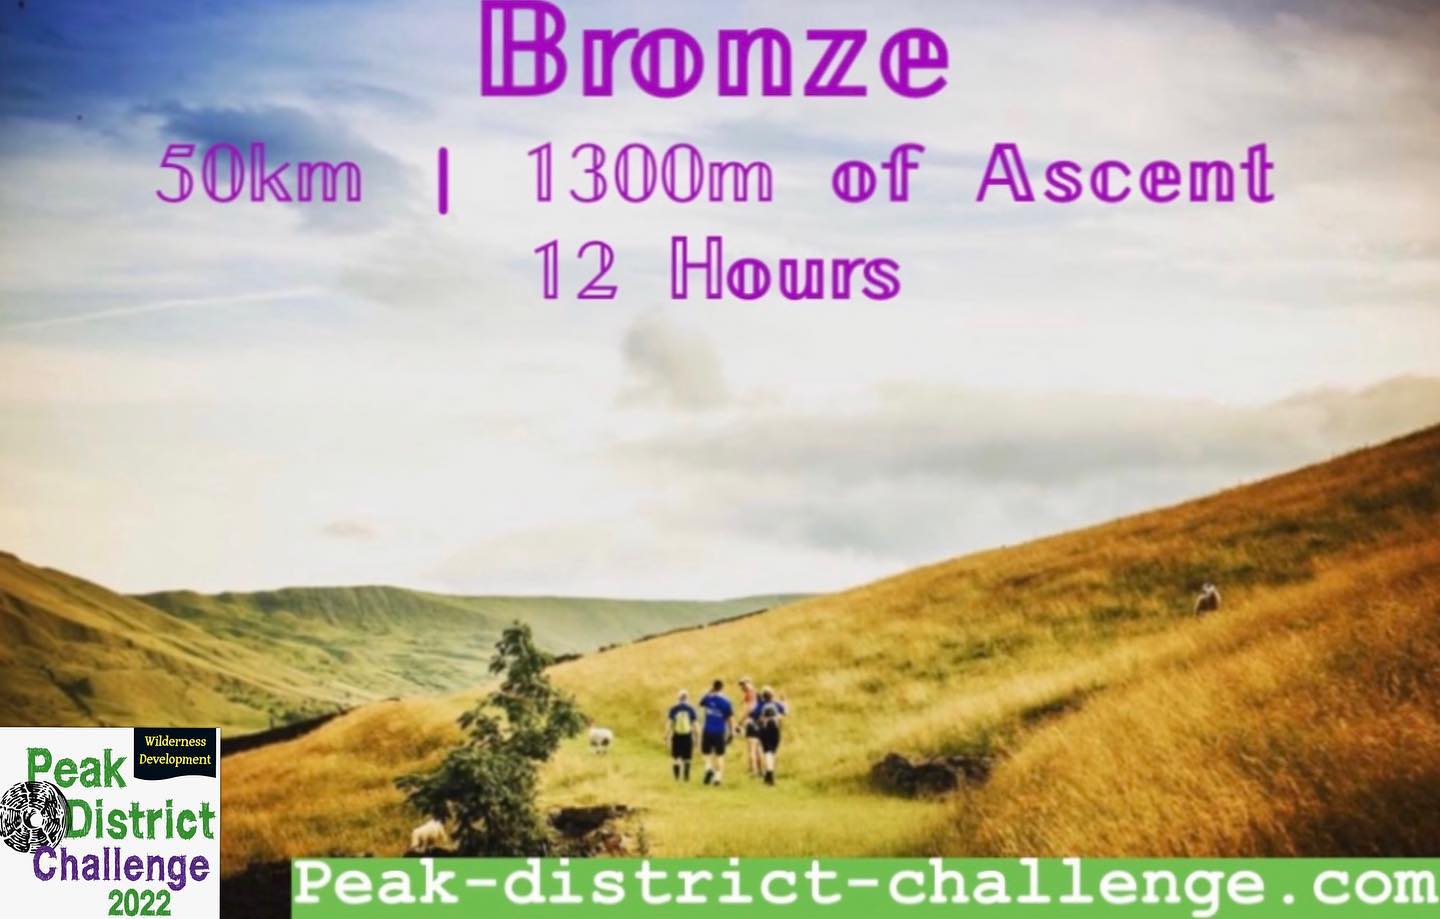 Have you set your 2022 challenge yet?? Register now for the Peak-District-Challenge.com 50km Bron...